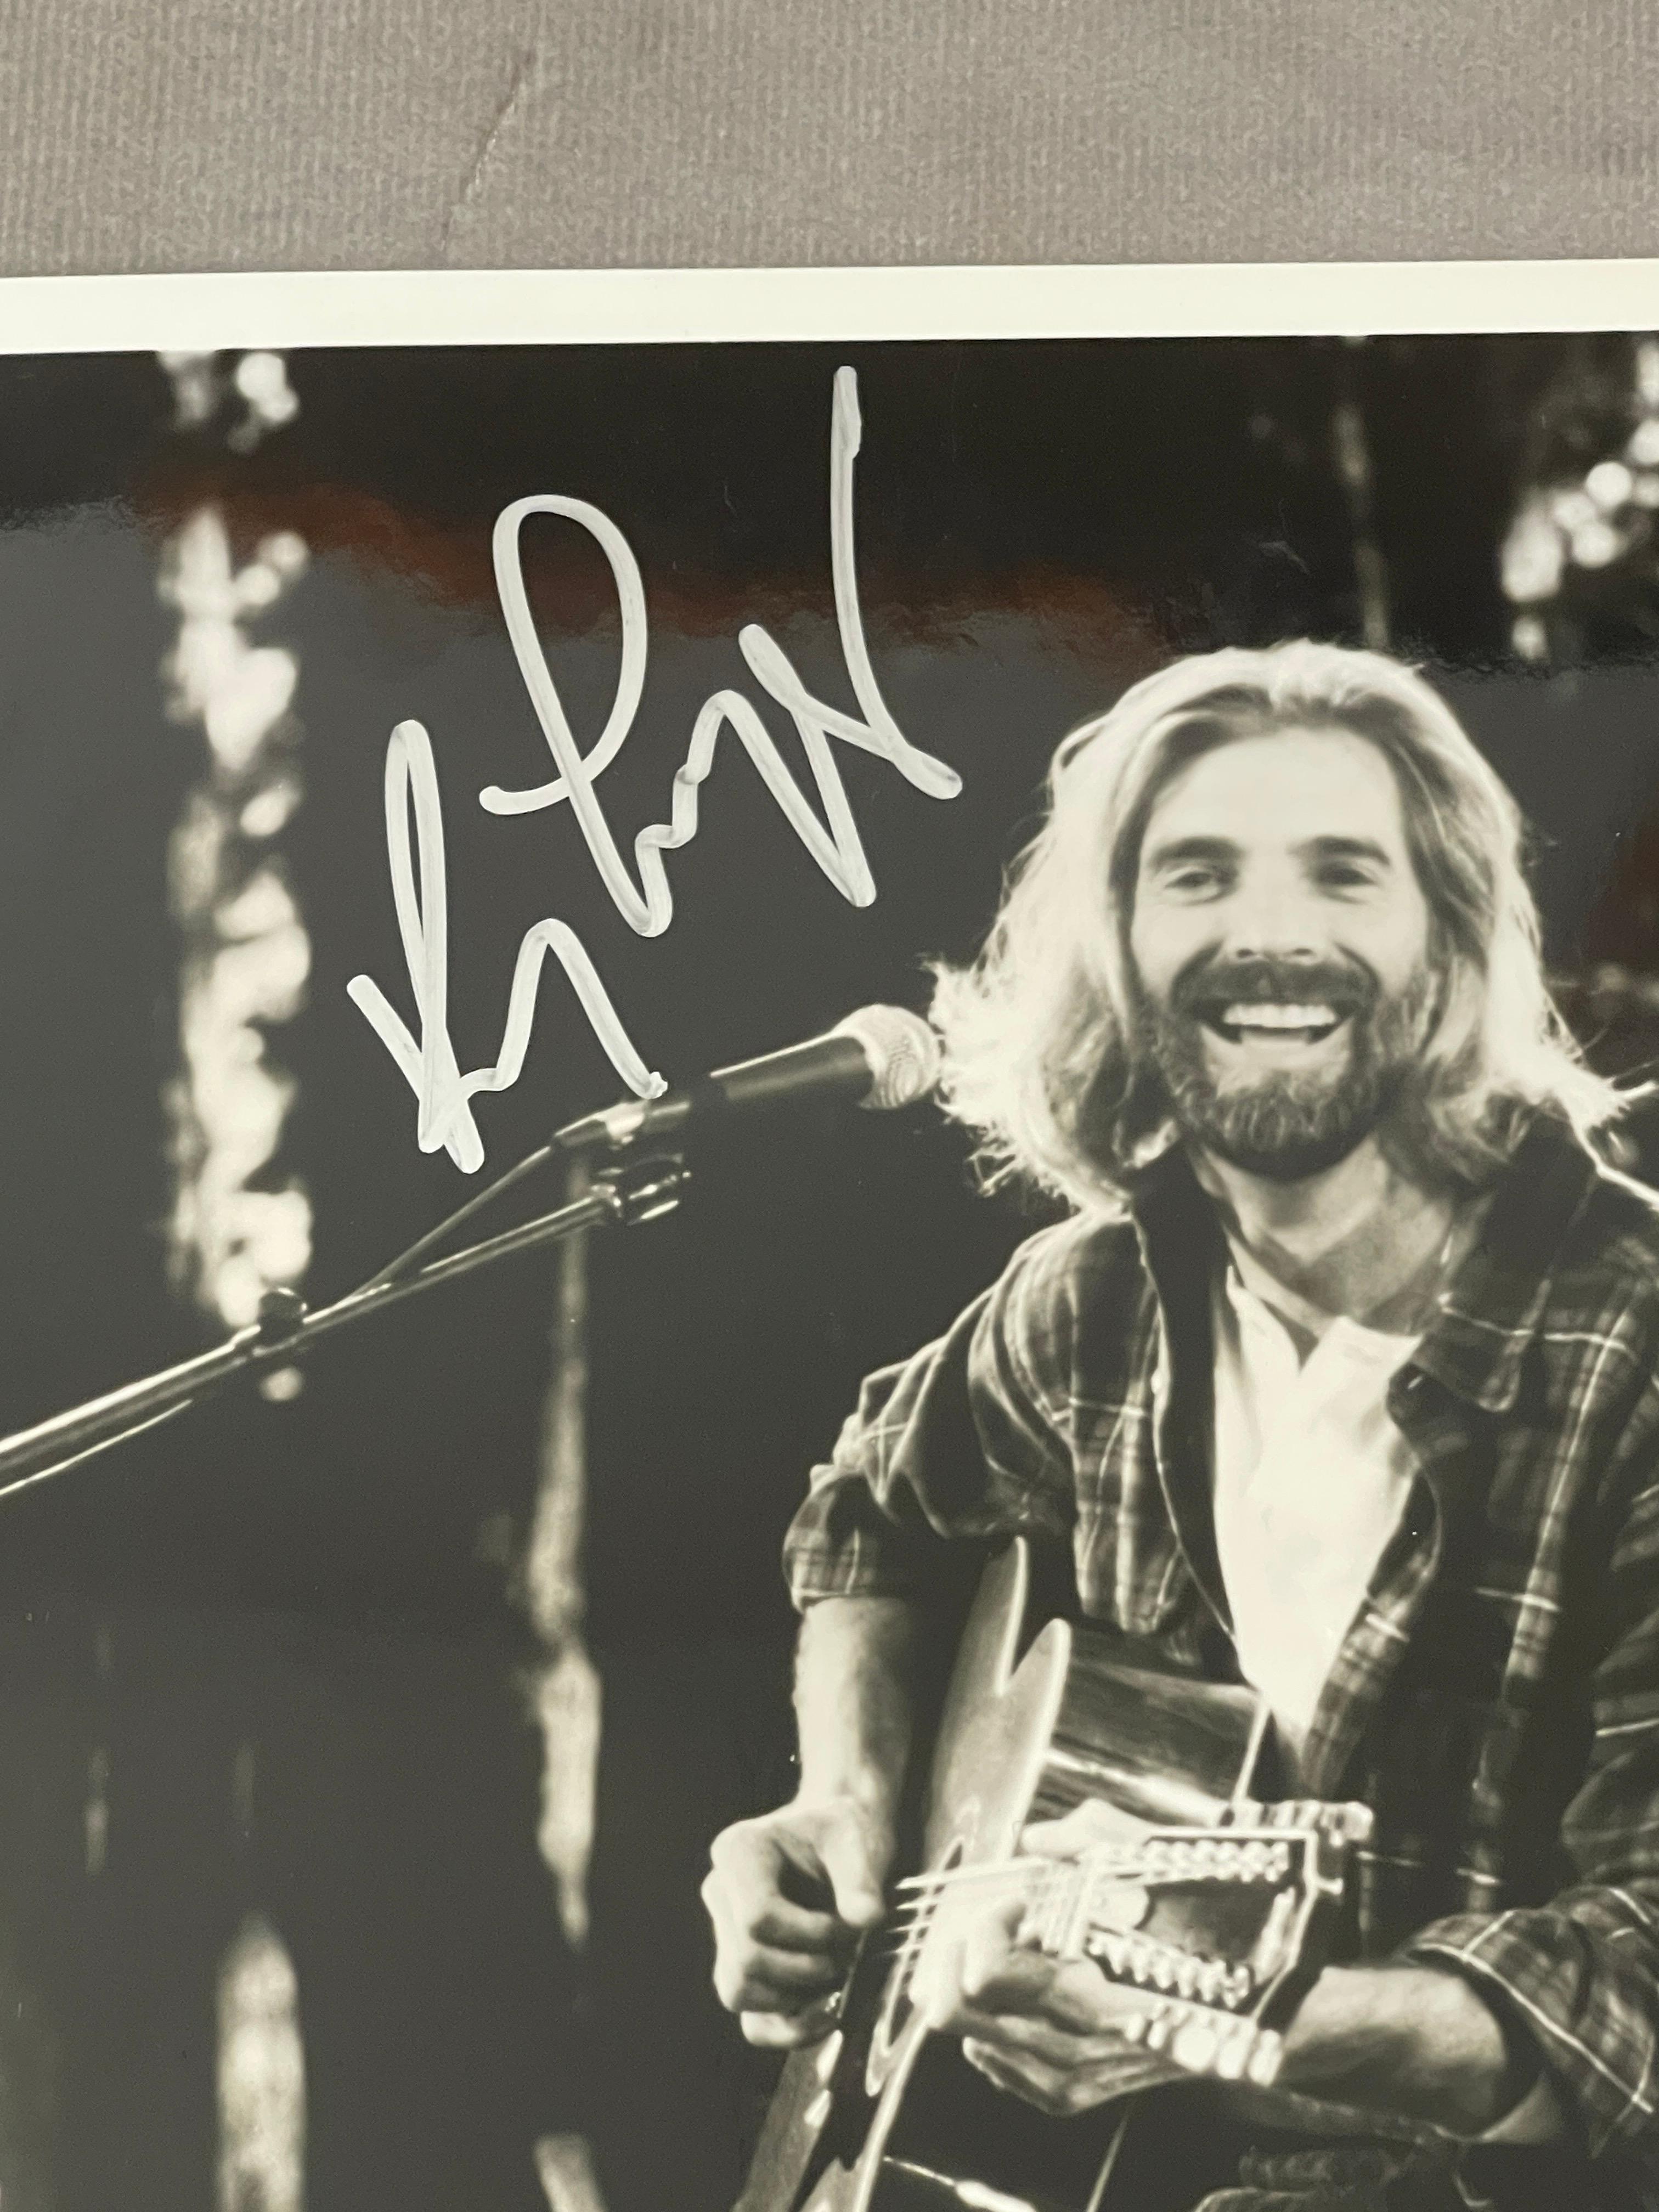 Kenny Loggins Photo Taken and Signed by RIchard Creamer Stamp in the Back